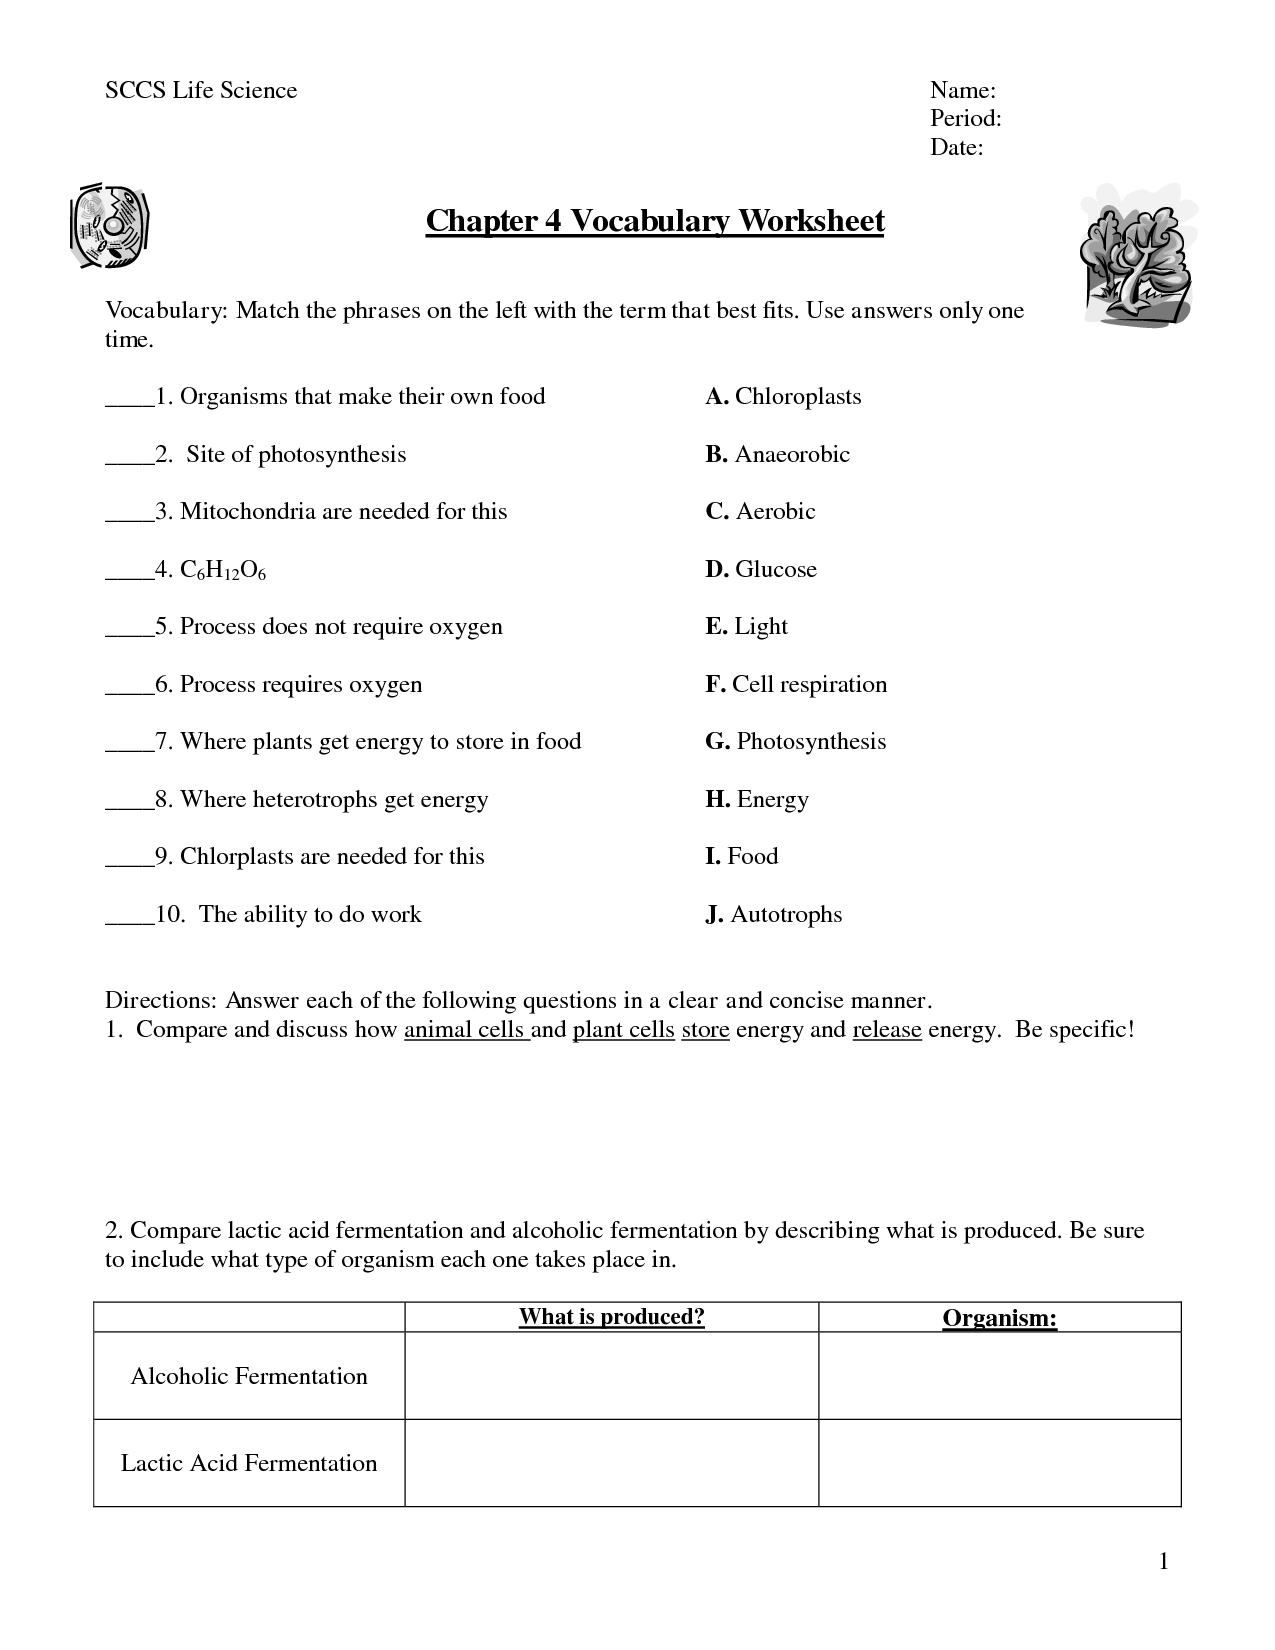 printables-of-photosynthesis-and-cellular-respiration-worksheet-key